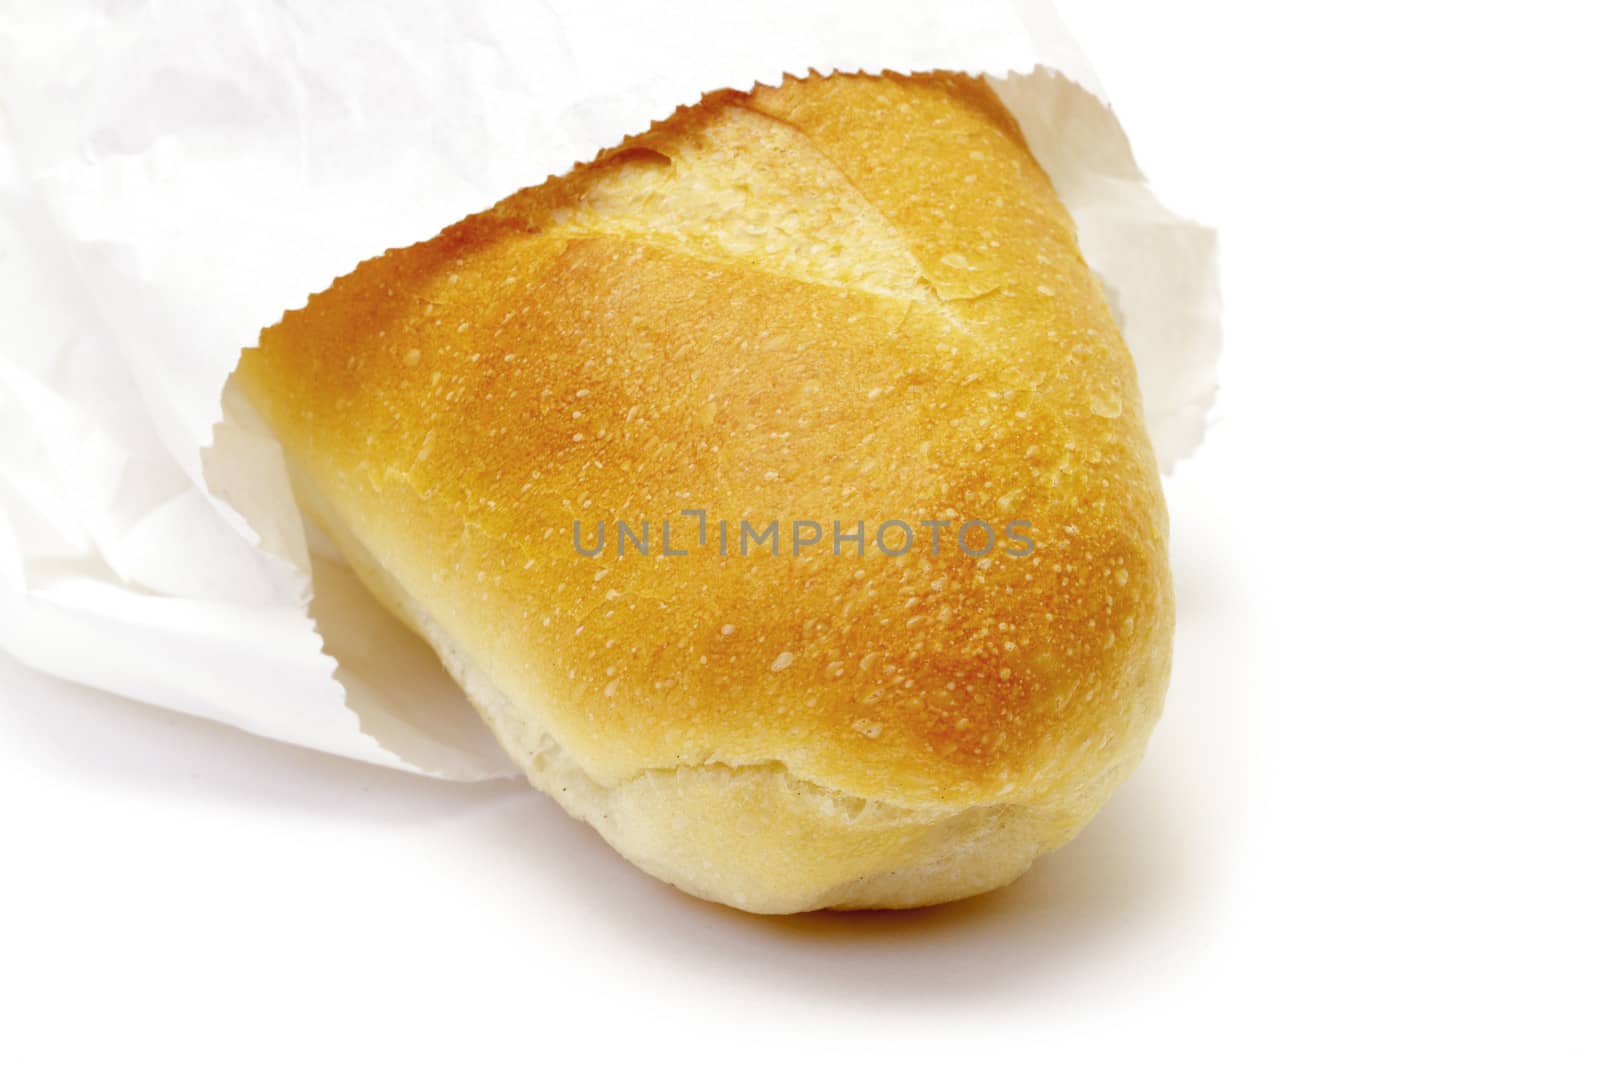 Wheat bread in paper packet on white